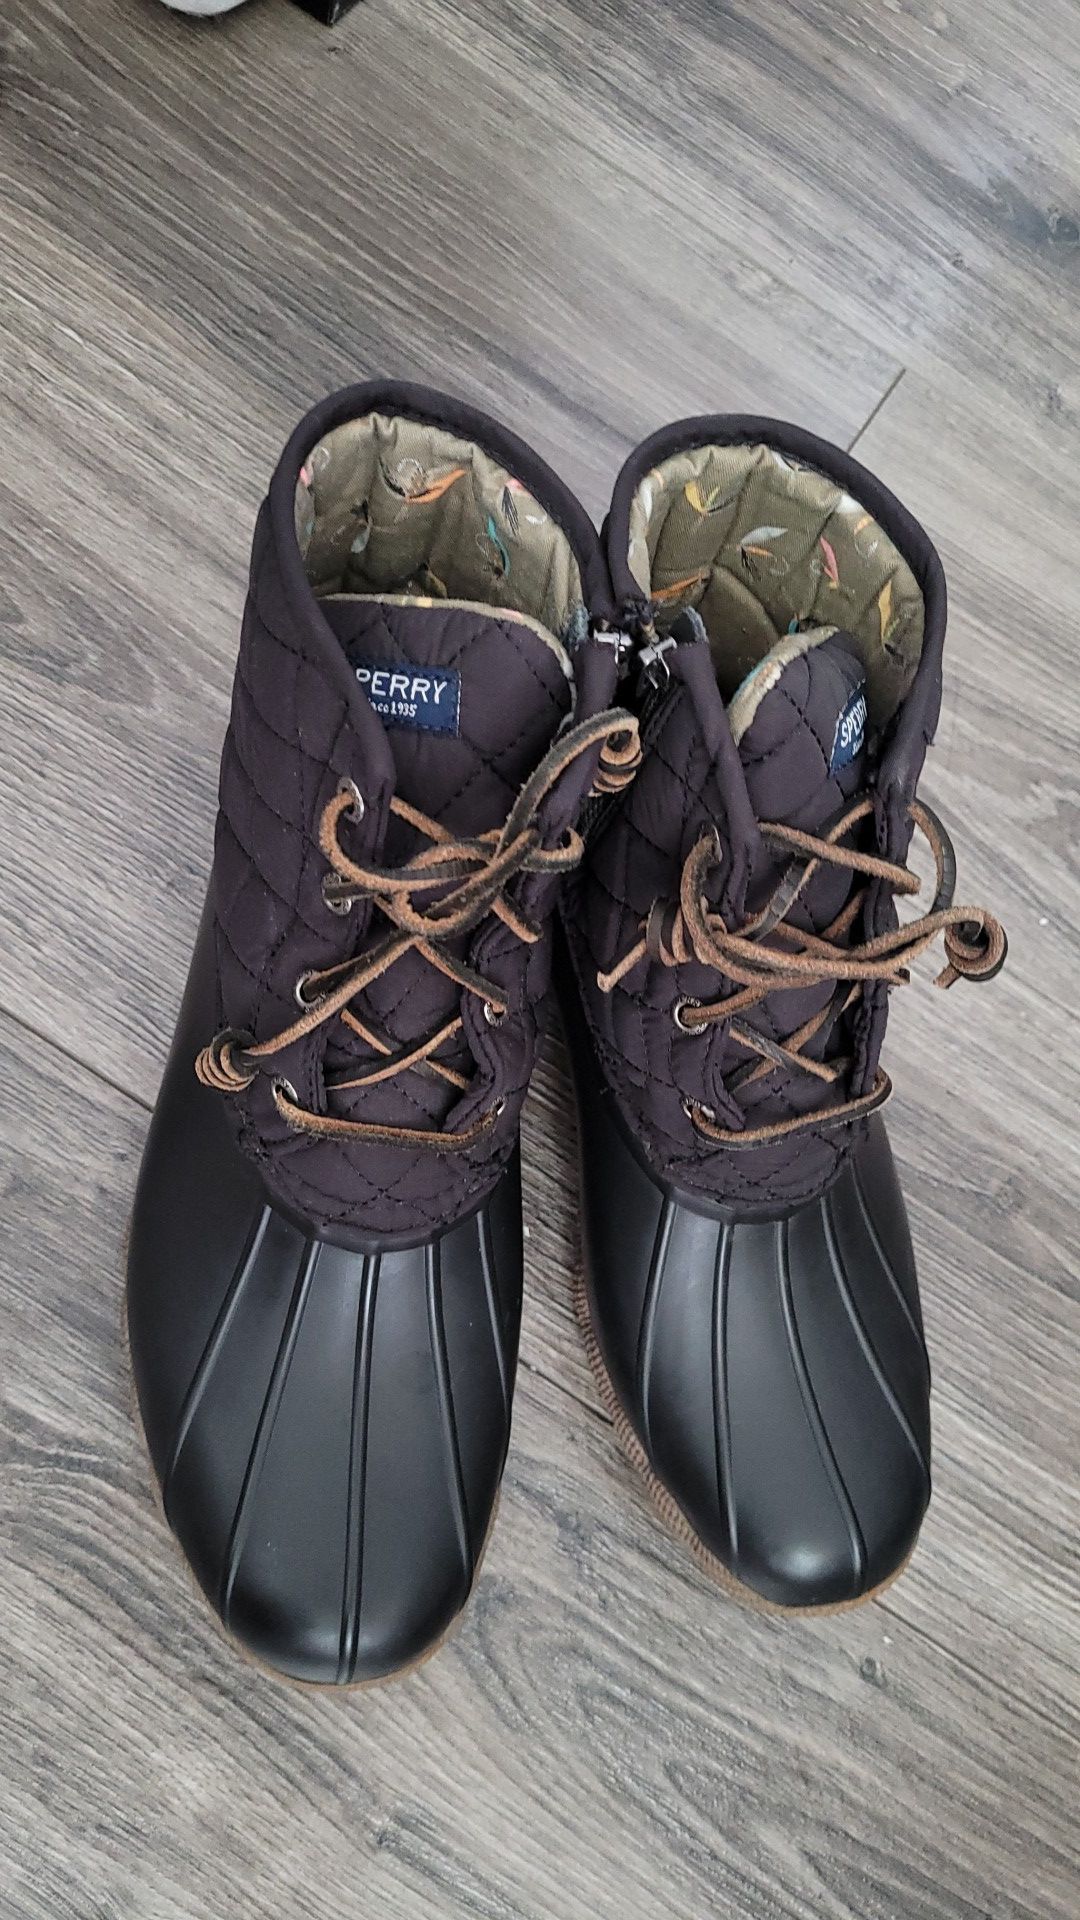 Sperry rain/snow water proof boots in the size women's 9M